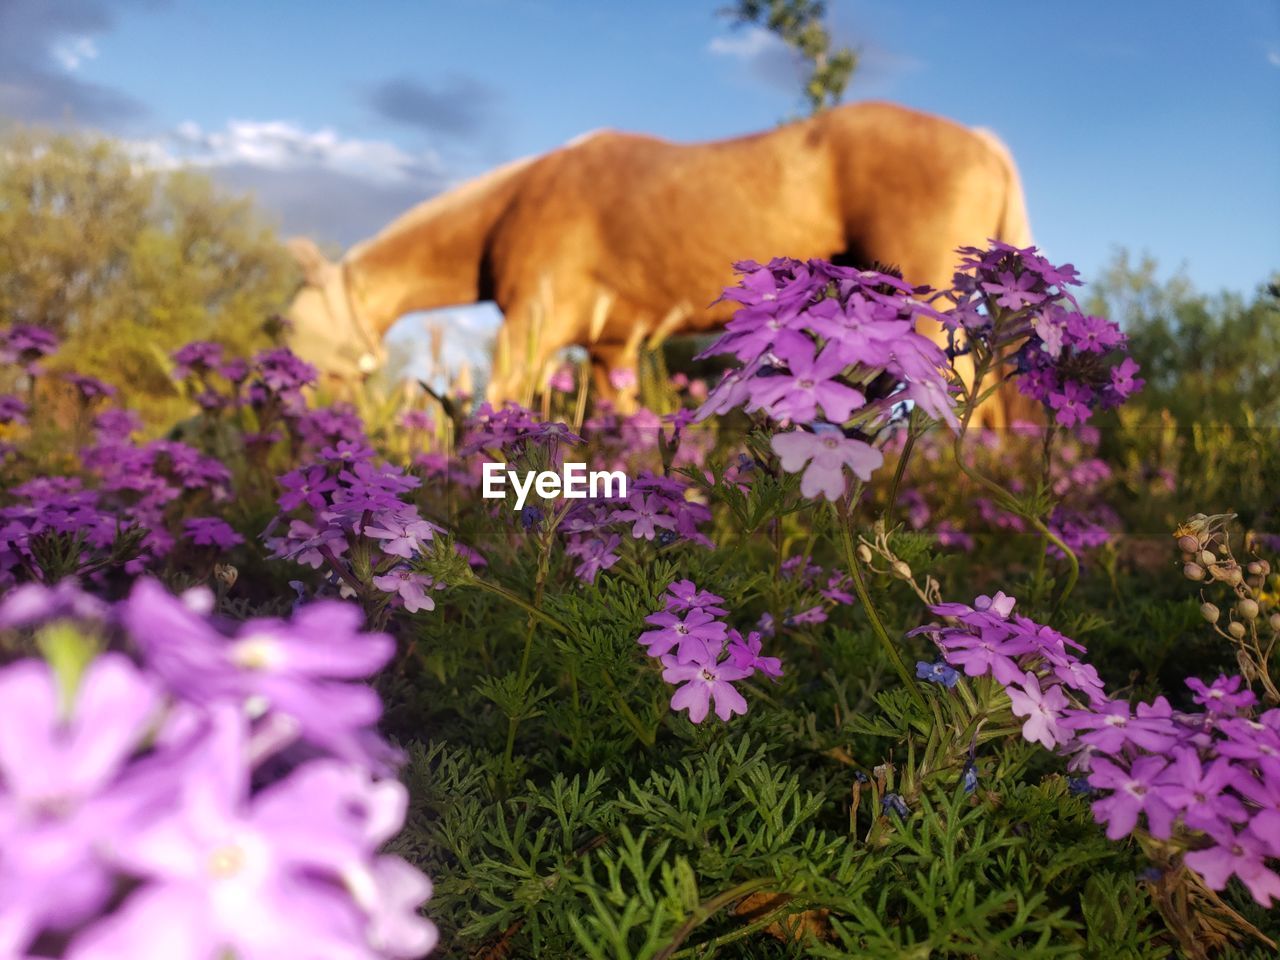 VIEW OF AN ANIMAL ON PURPLE FLOWER